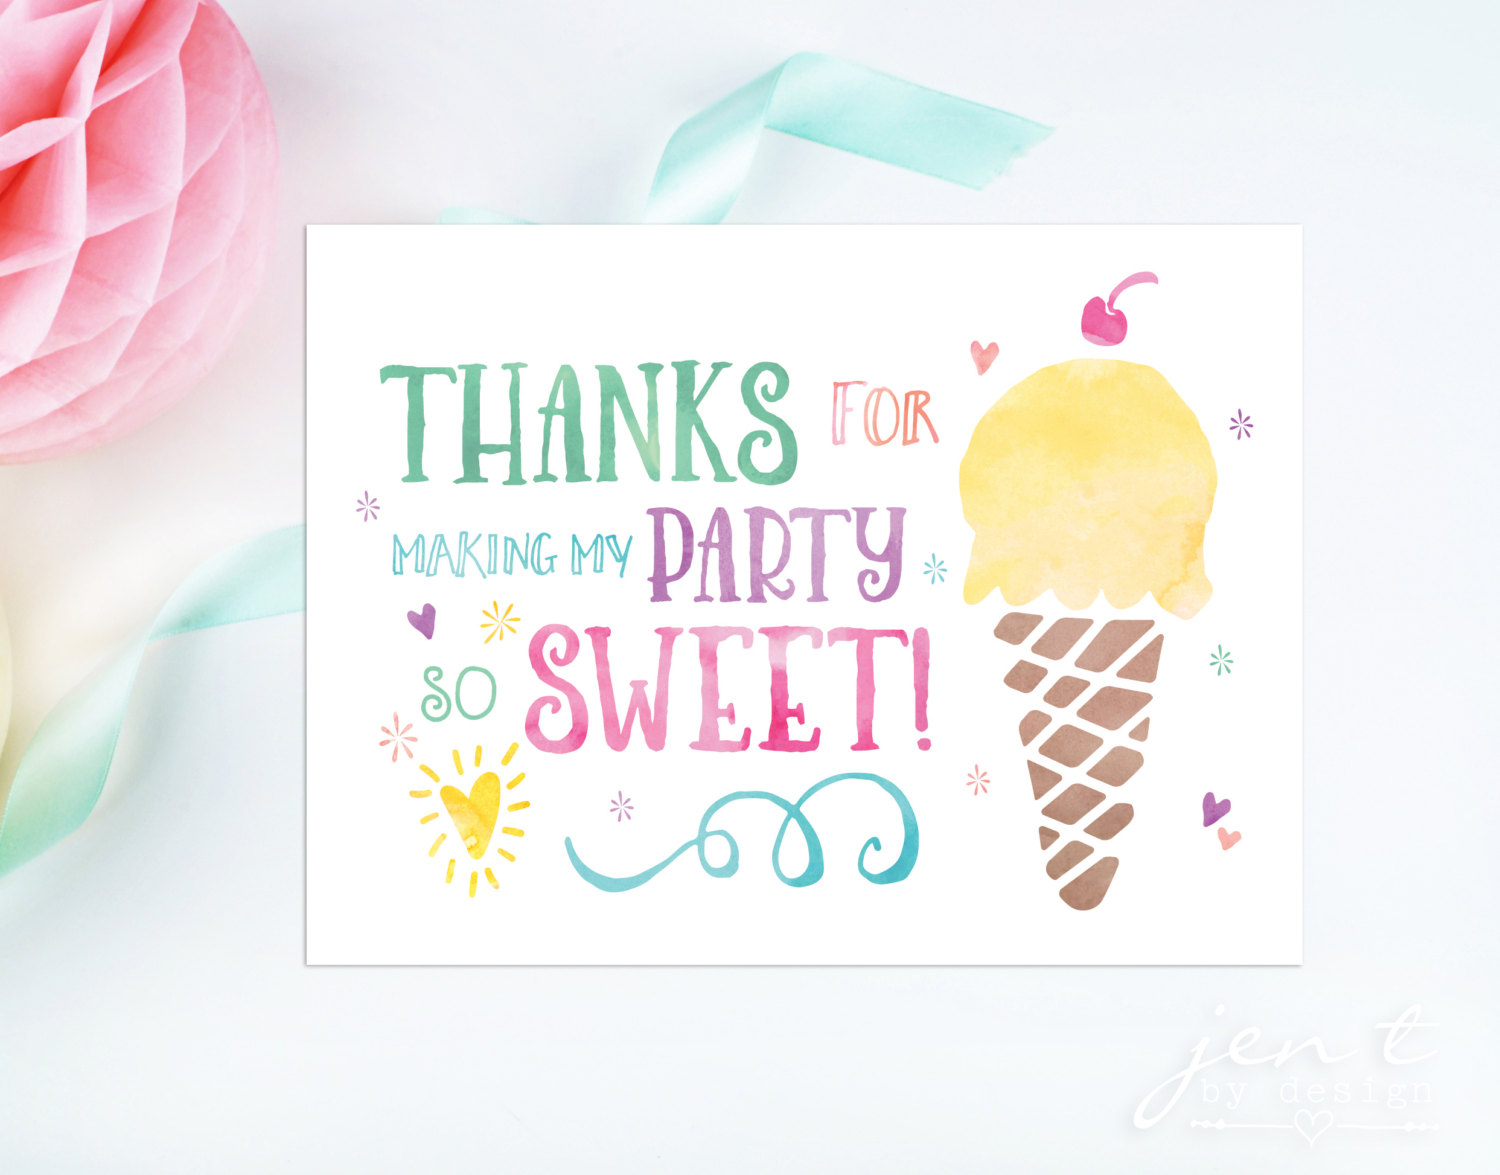 Stay Sweet Ice Cream Cone // Watercolor Notecards